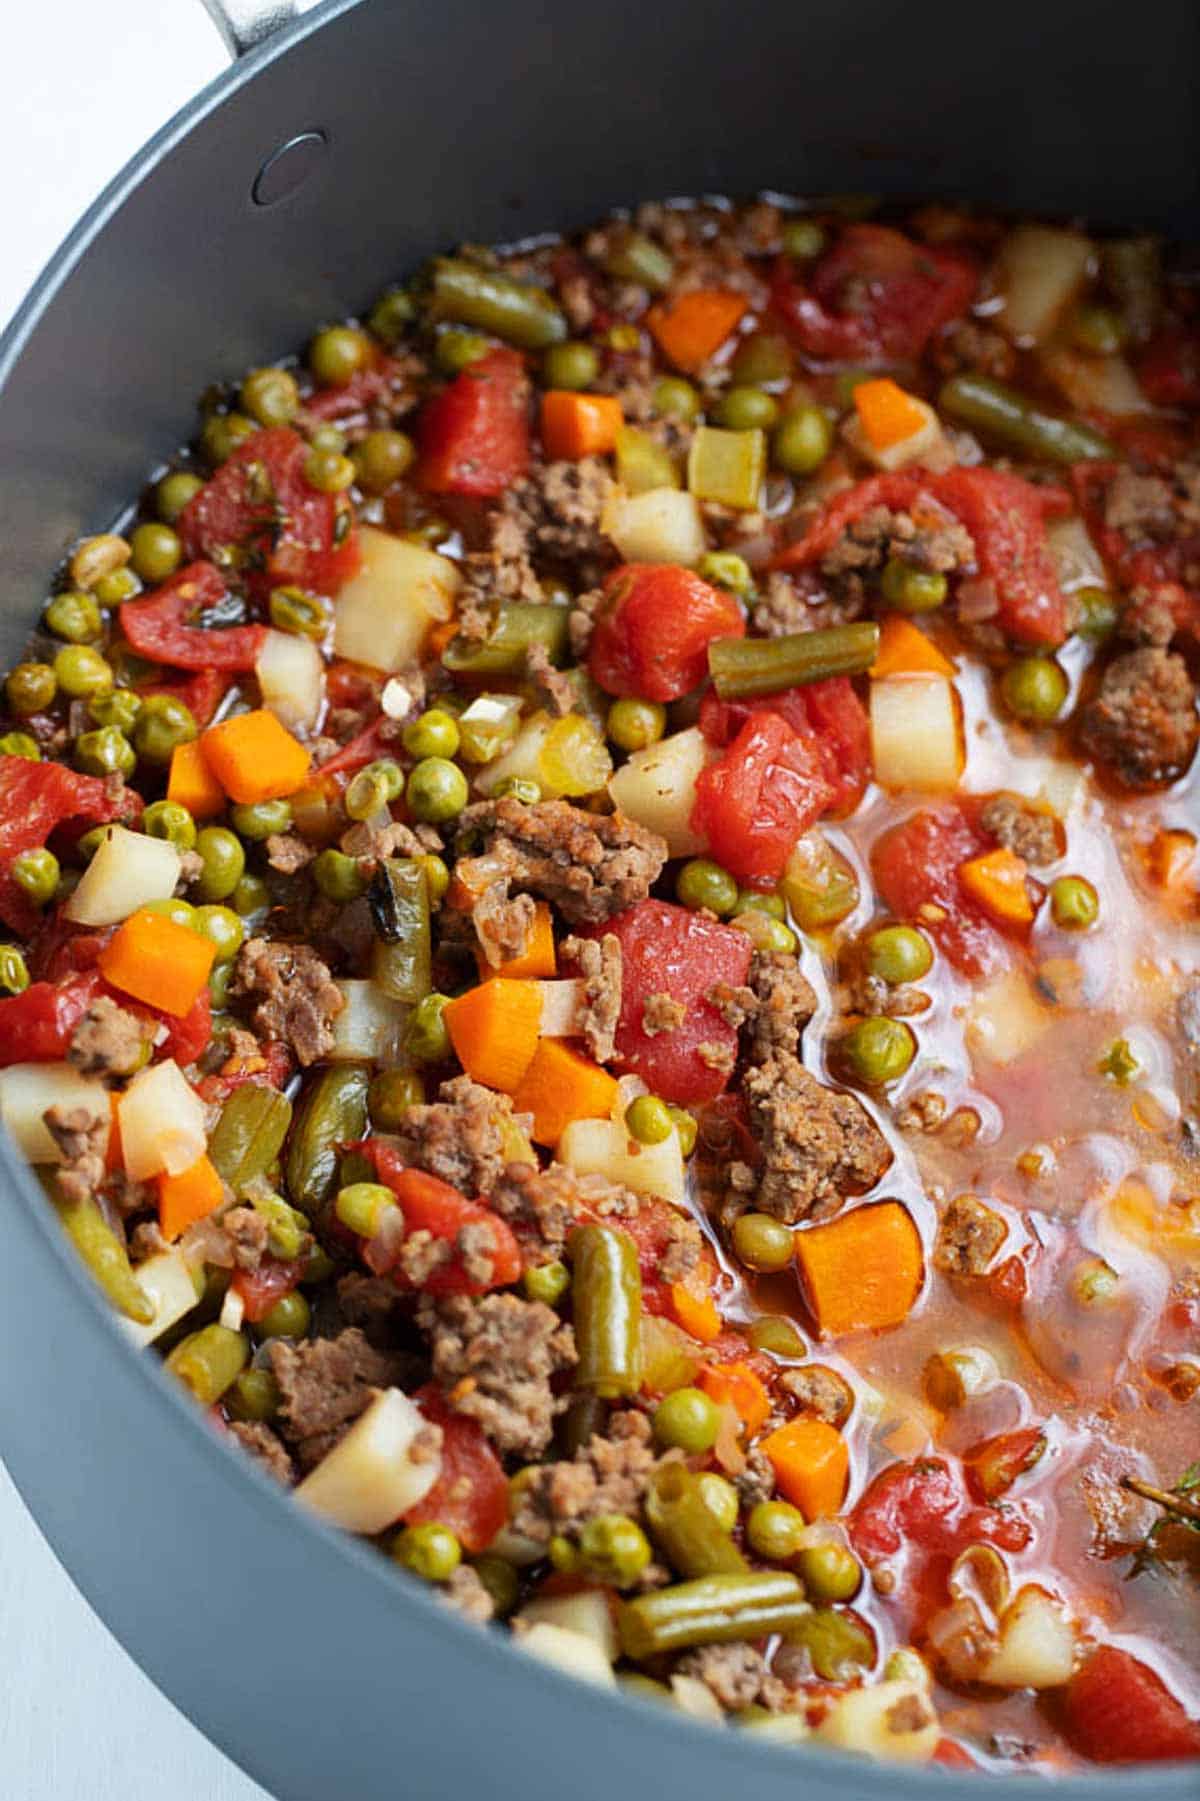 Vegetable ground beef soup in a large pot on the stove.